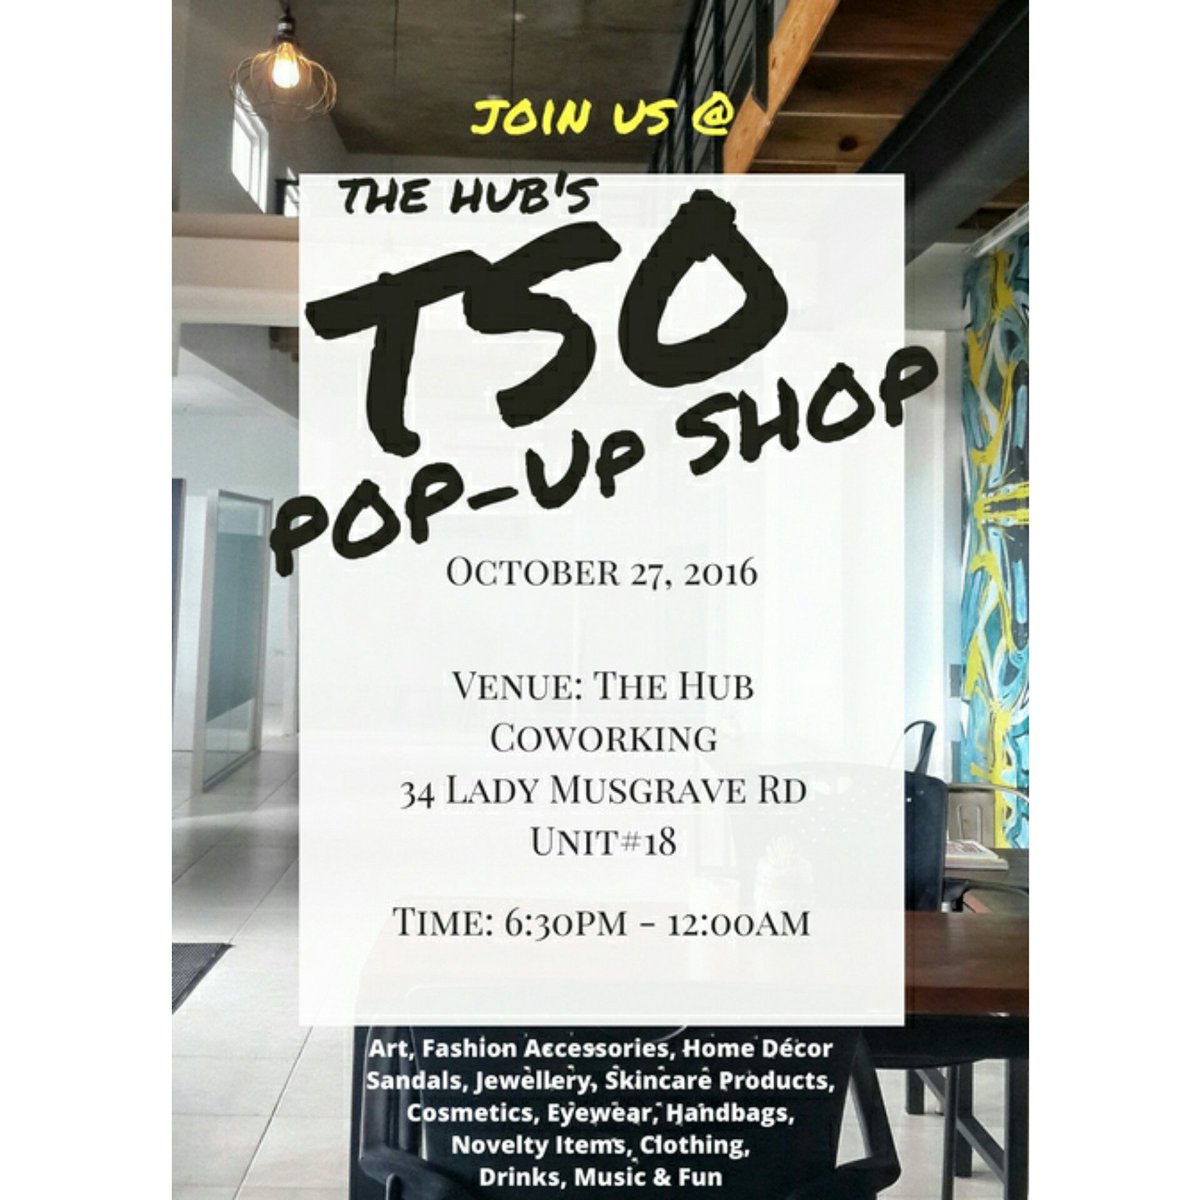 Today's the day! Stop by or pop-up shop this evening and enjoy 50%off drop-in rates all day! #SupportingEntrepreneurs. #jamaica #tso2016